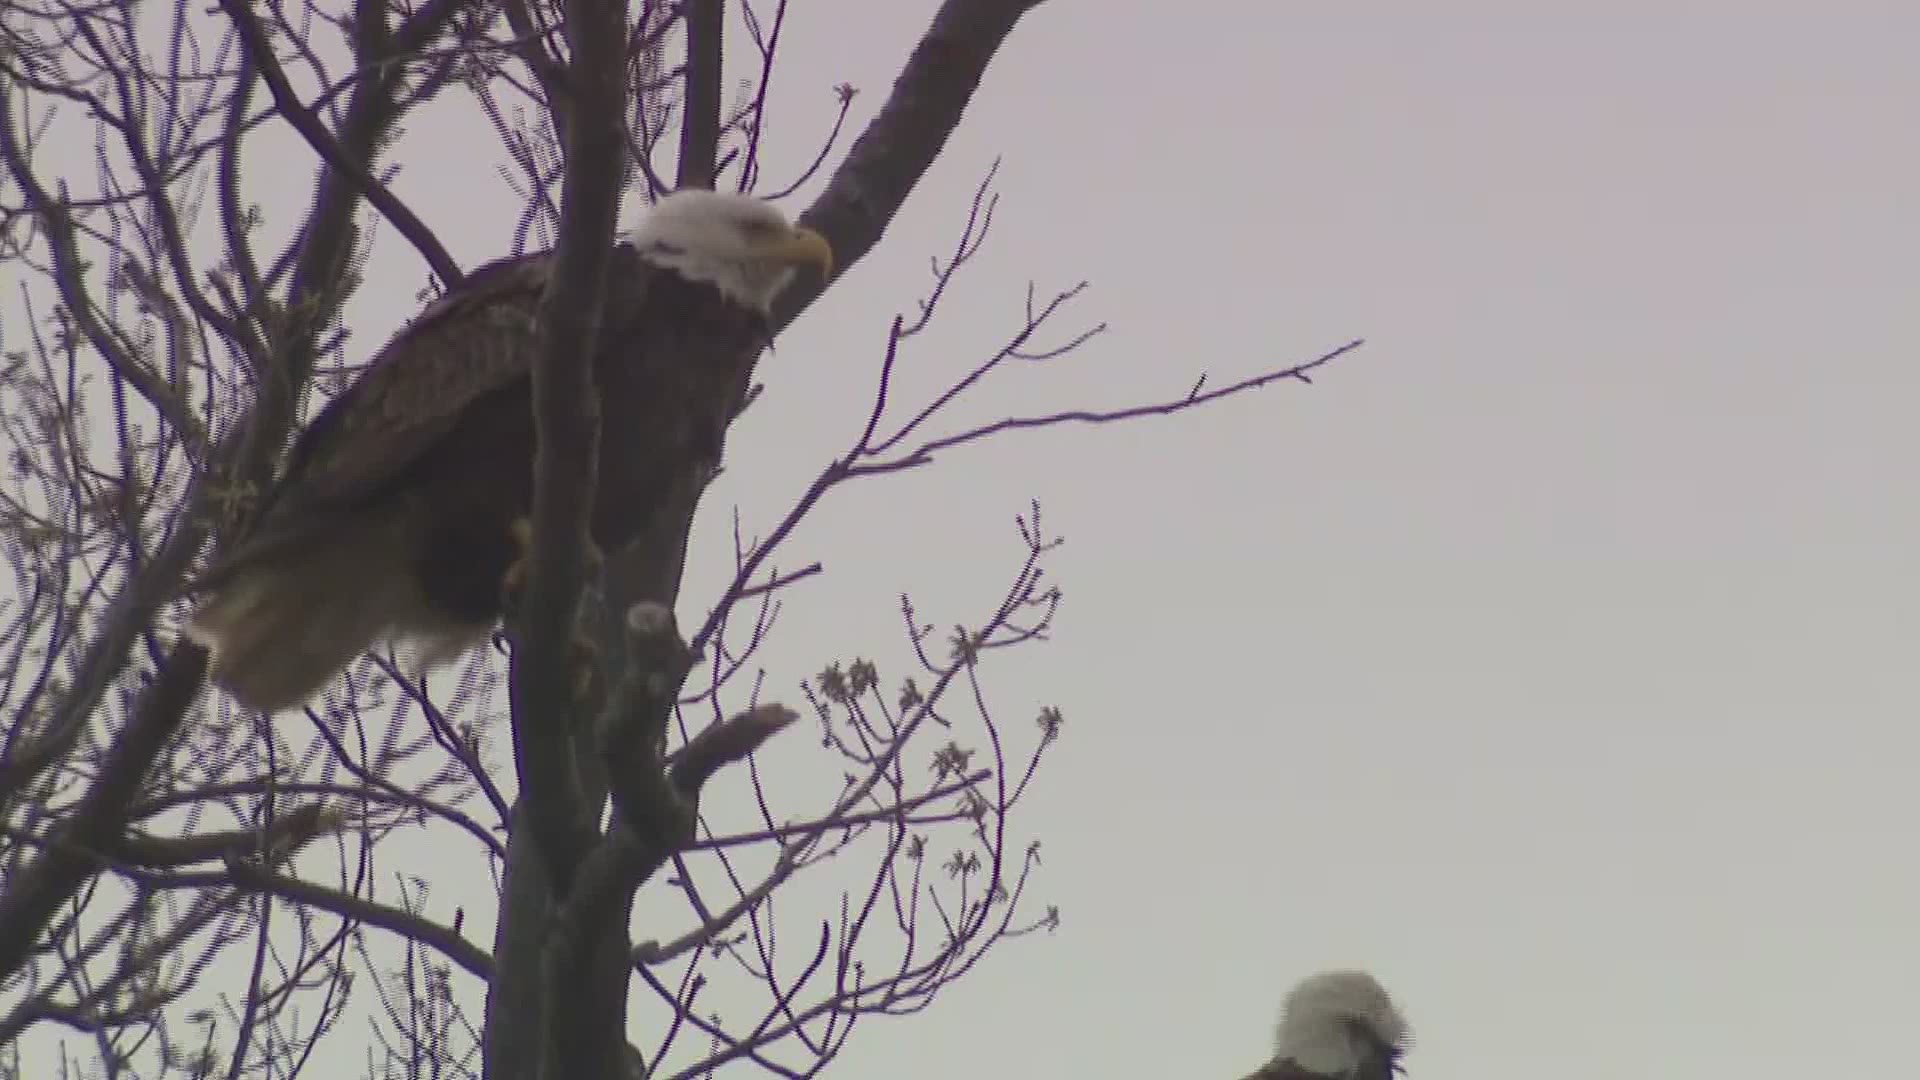 The U.S. Fish and Wildlife Service says they're seeing more bald eagles killed by lead poisoning. And it's one simple change that could make big difference.